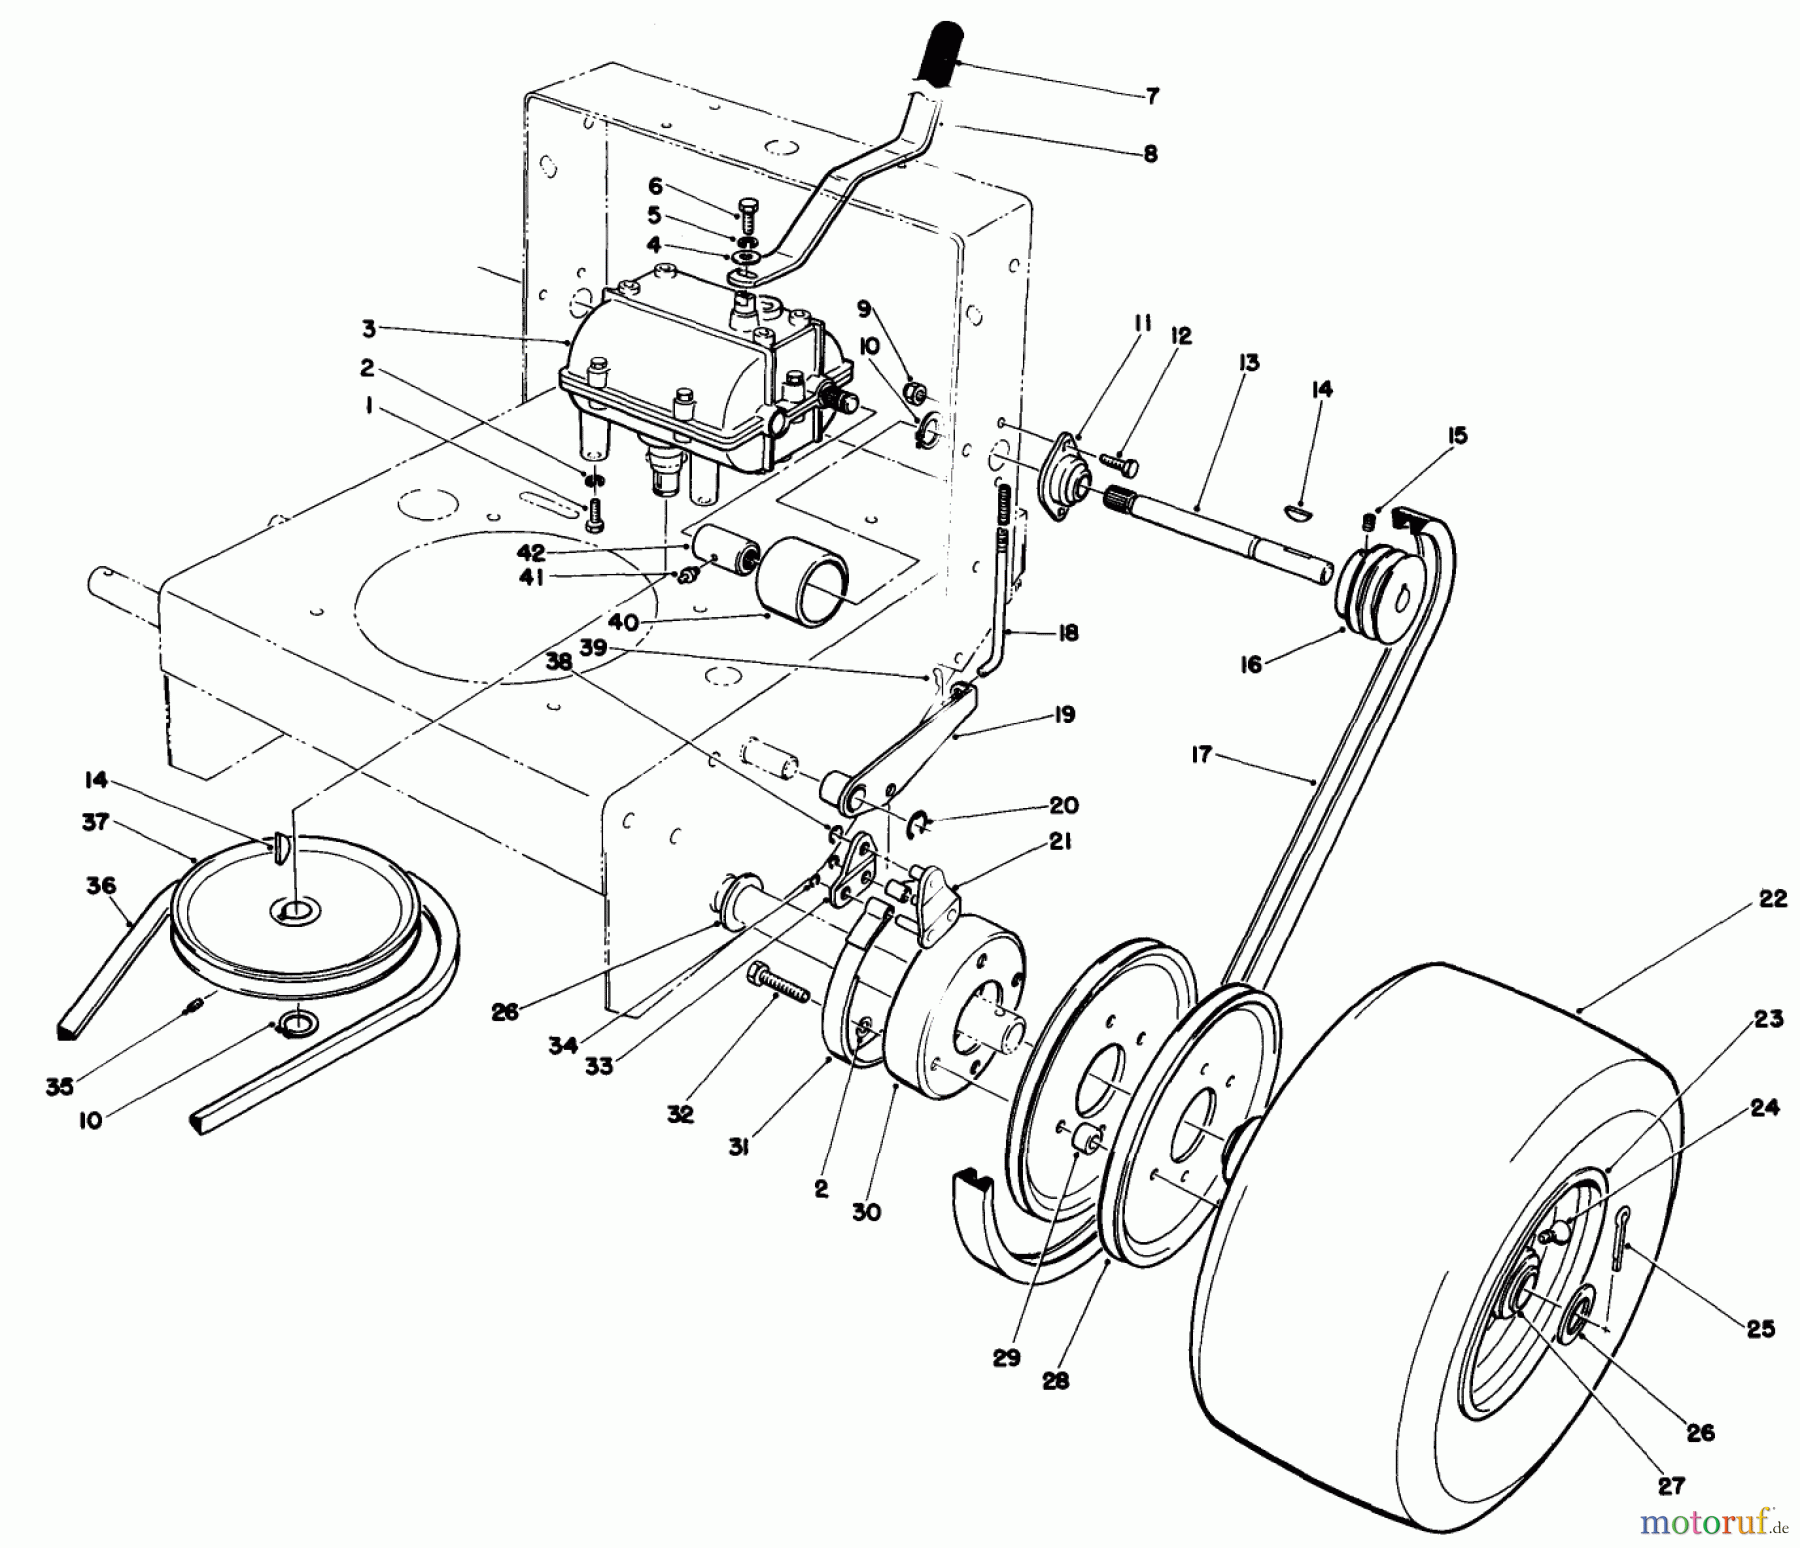  Toro Neu Mowers, Drive Unit Only 30111 - Toro Mid-Size Proline Gear Traction Unit, 11 hp, 1985 (5000001-5999999) AXLE ASSEMBLY